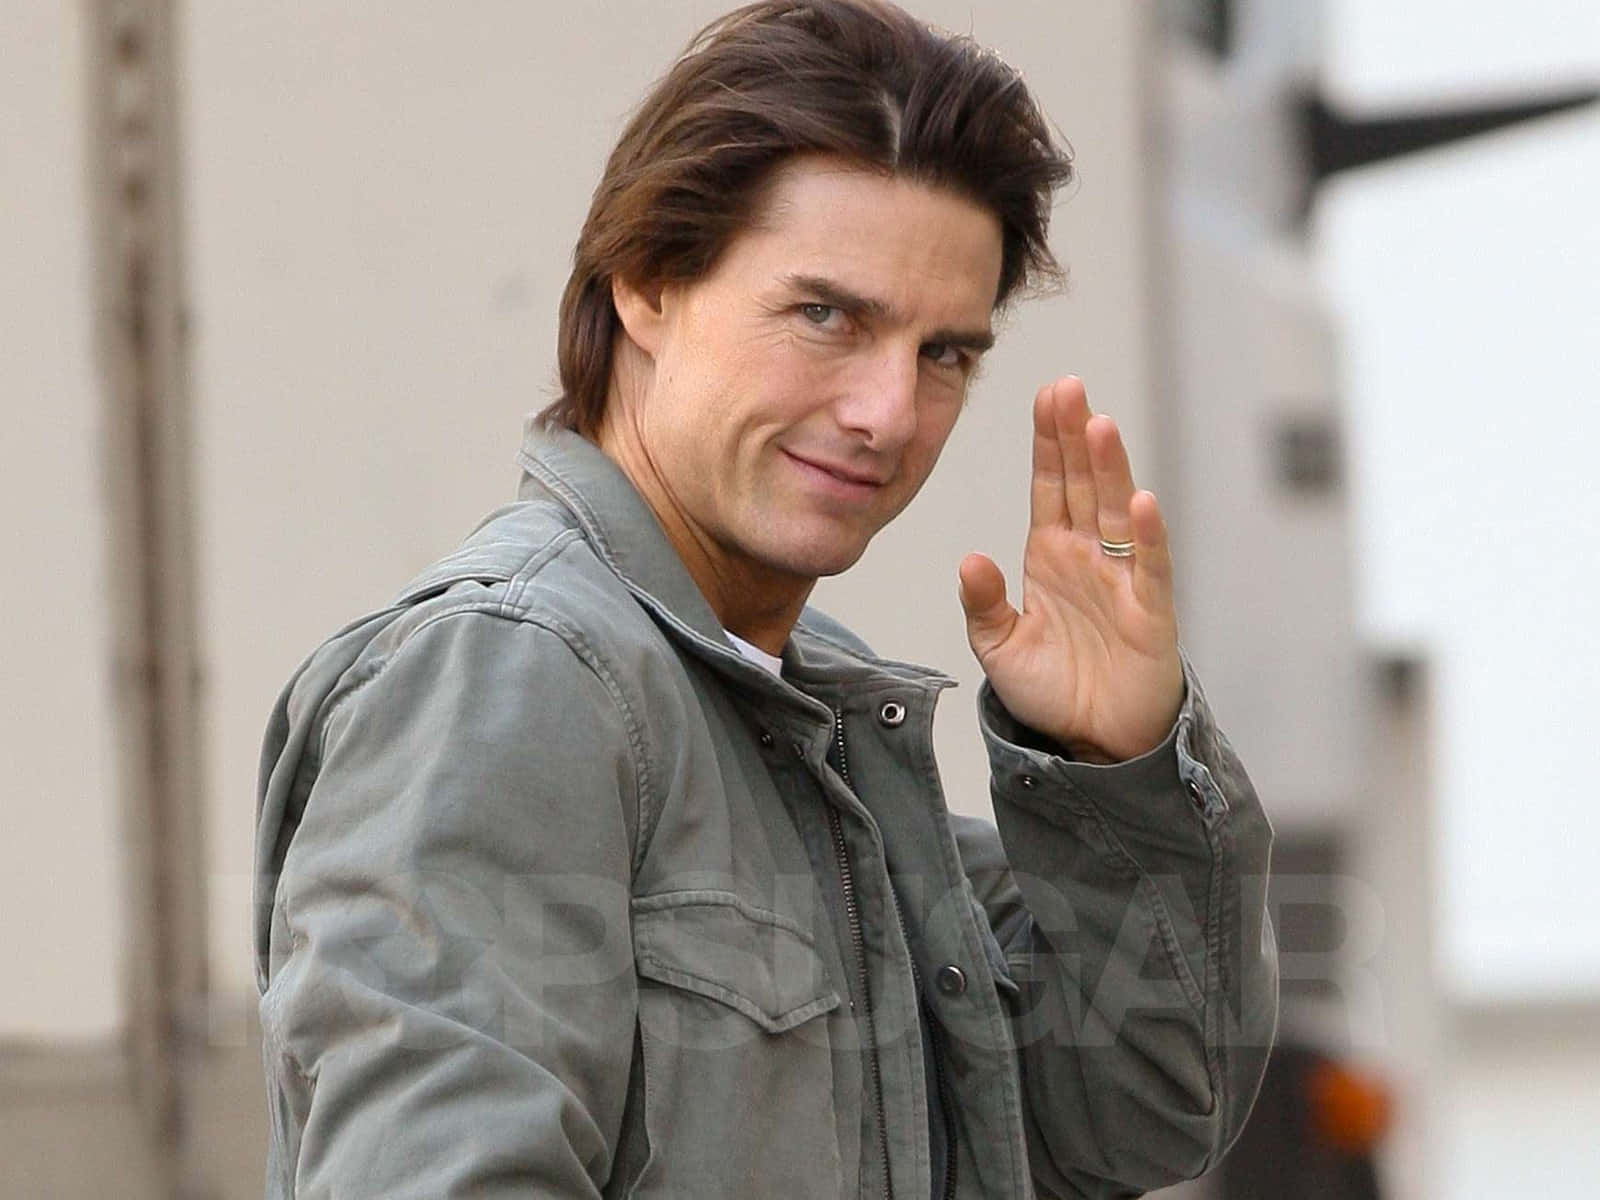 Homembranco Ator Tom Cruise - Referring To A Possible Wallpaper Featuring Tom Cruise In A White Outfit. Papel de Parede